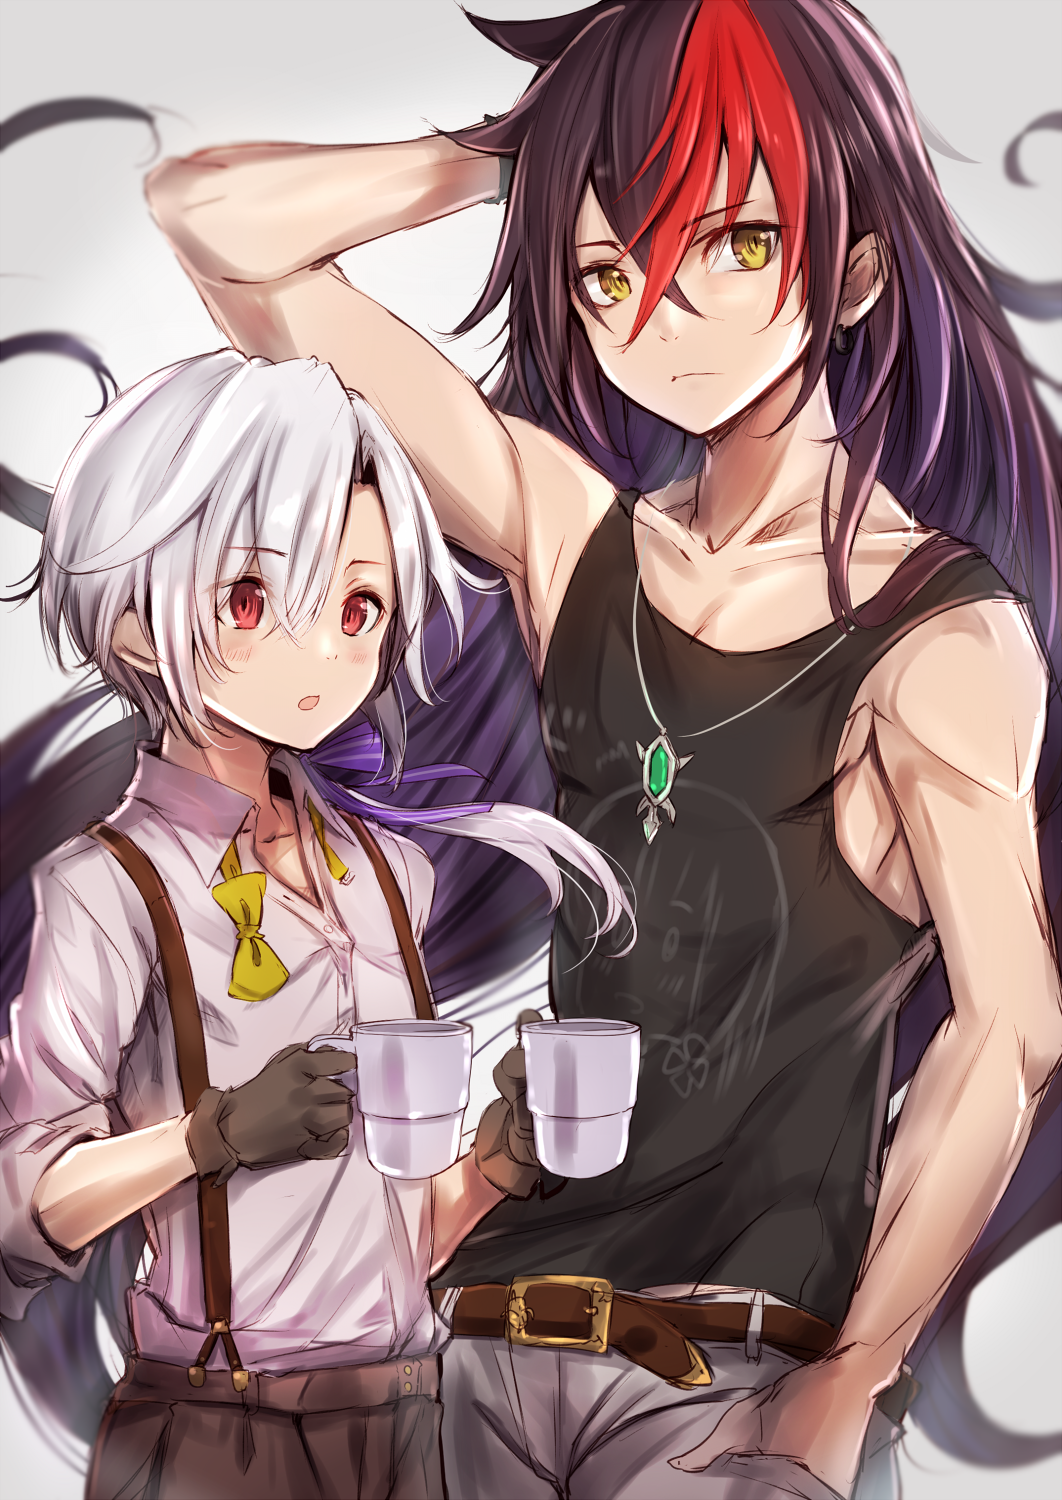 2boys belt black_hair black_shirt blush bow brown_belt collarbone commentary_request cup eyebrows_visible_through_hair fuku_kitsune_(fuku_fox) hair_between_eyes hair_bow hair_ornament hand_in_hair highres holding holding_cup joshua_lerner long_hair looking_at_viewer male_focus multicolored_hair multiple_boys red_eyes redhead shironeko_project shirt shorts sleeveless sleeveless_shirt suspenders two-tone_hair white_hair white_shirt yellow_bow yellow_eyes yellow_neckwear